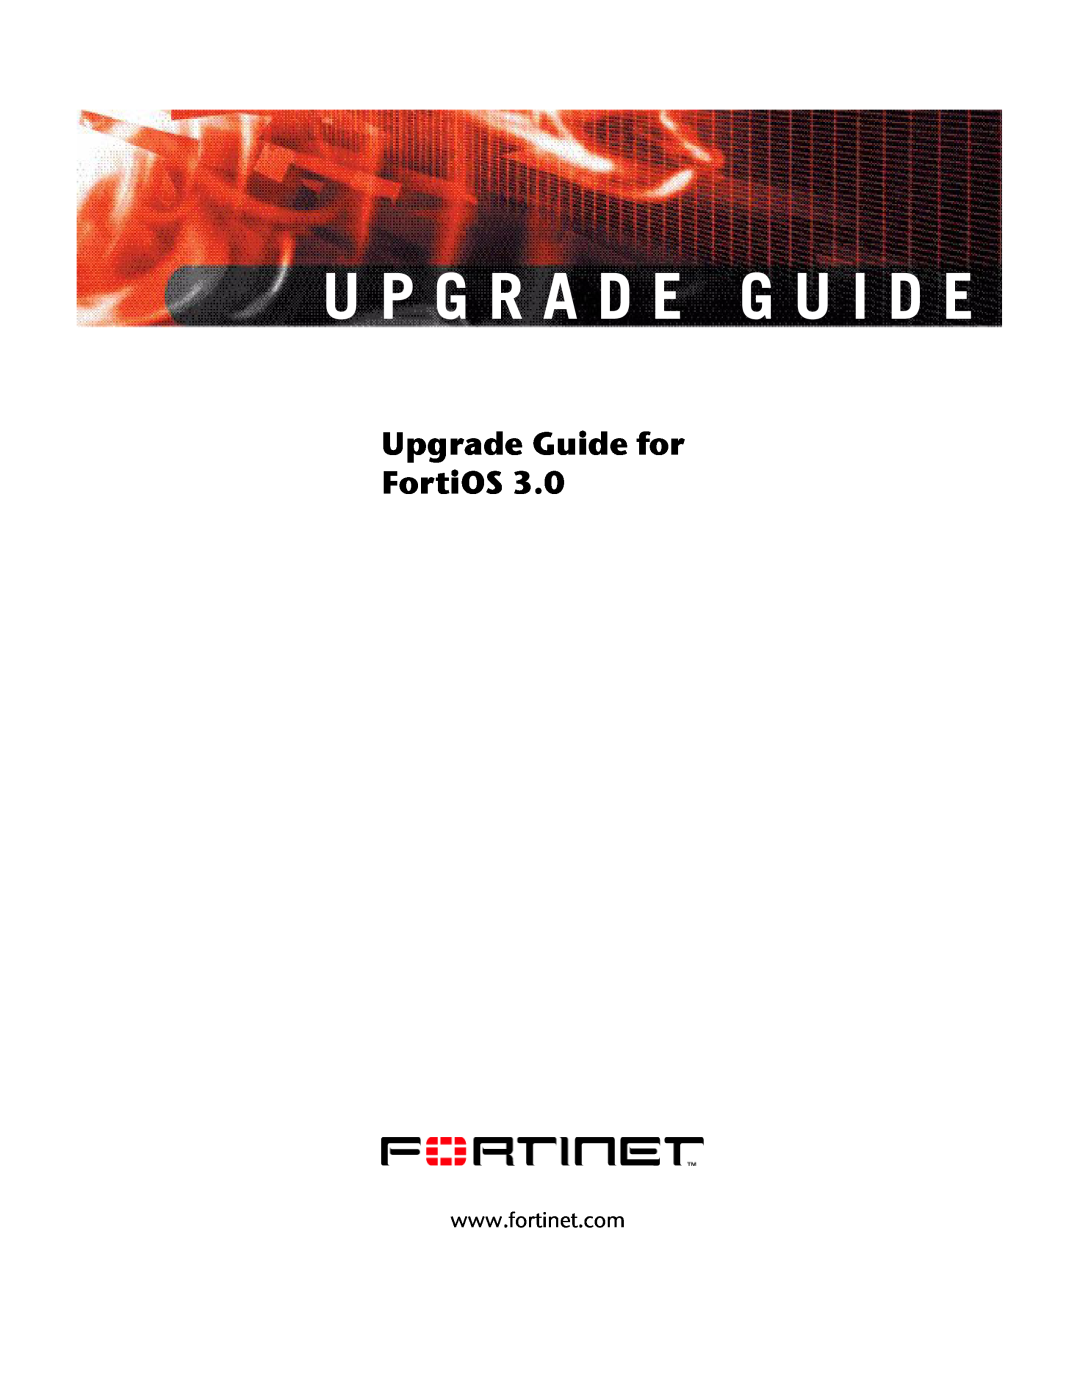 Fortinet FortiOS 3.0 manual U P G R A D E G U I D E, Upgrade Guide for FortiOS 